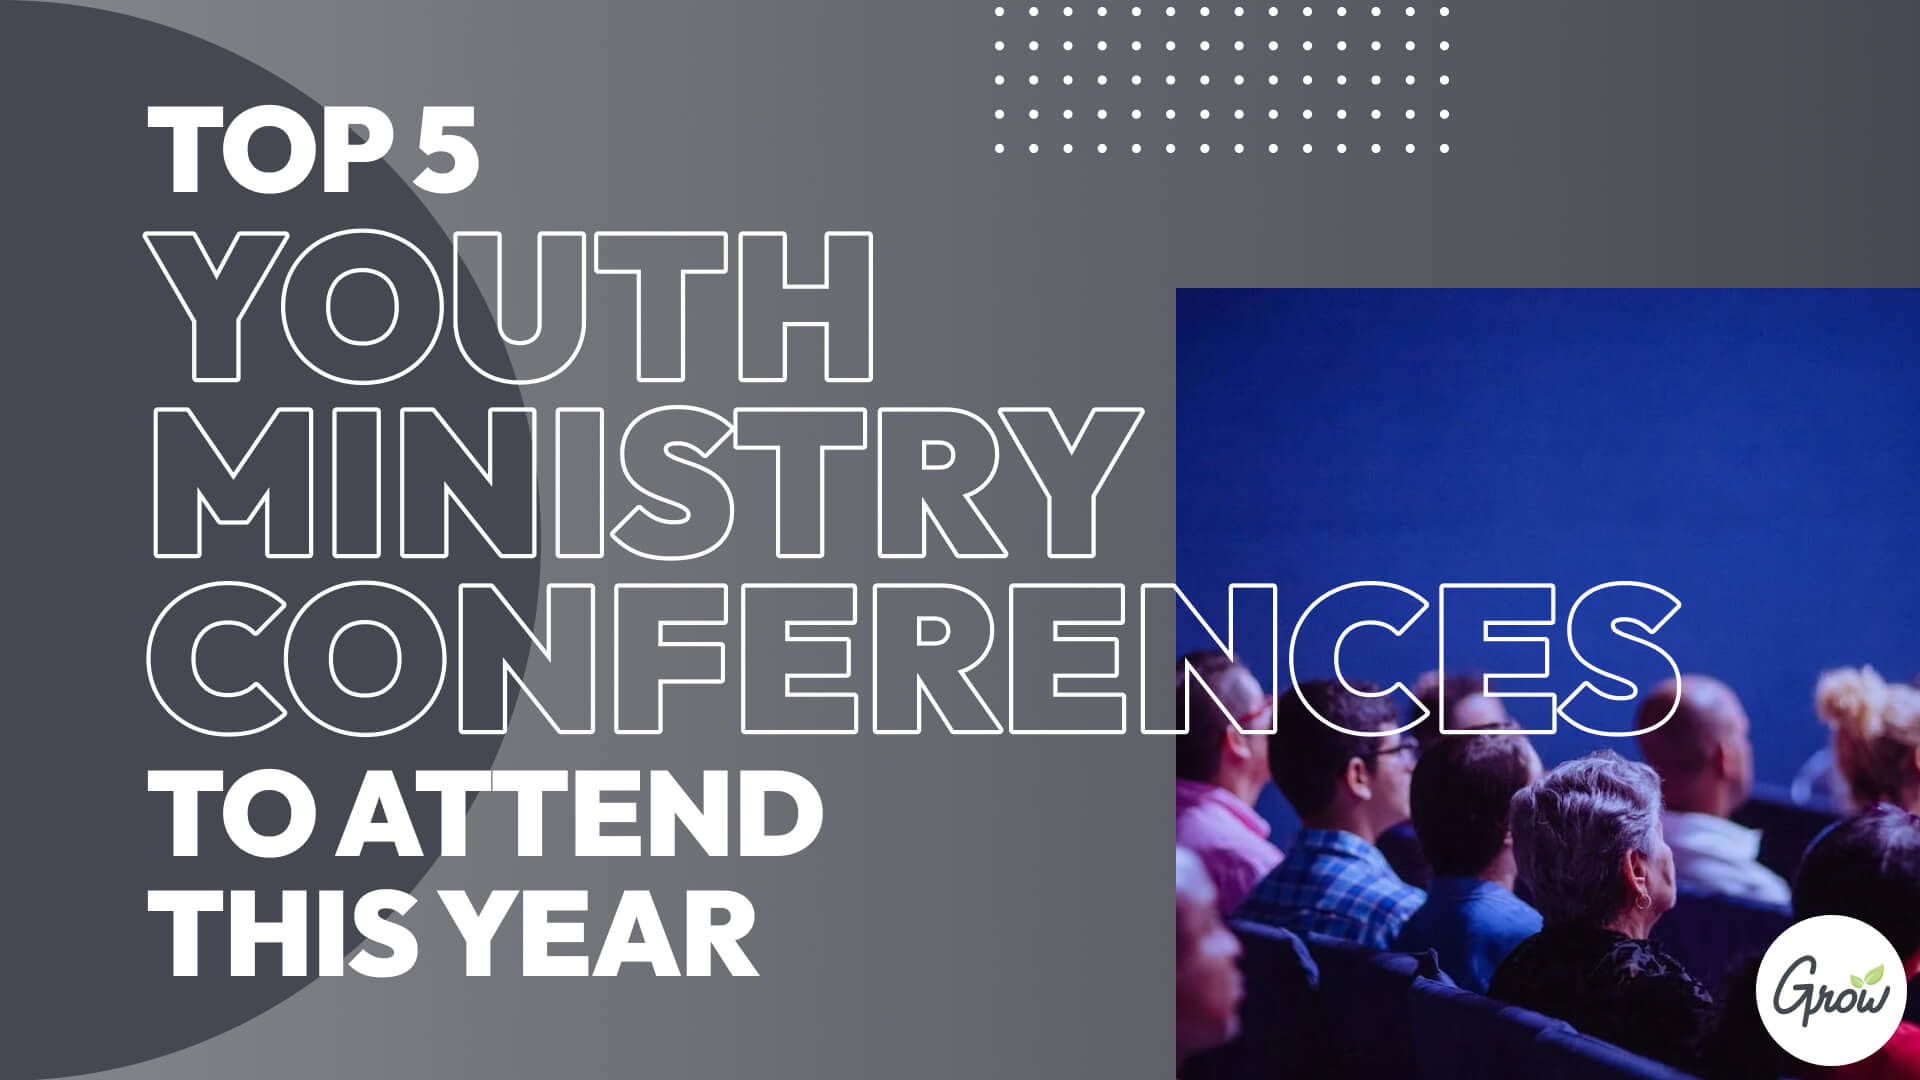 Top5YouthConferences_HeaderTitle_16x9